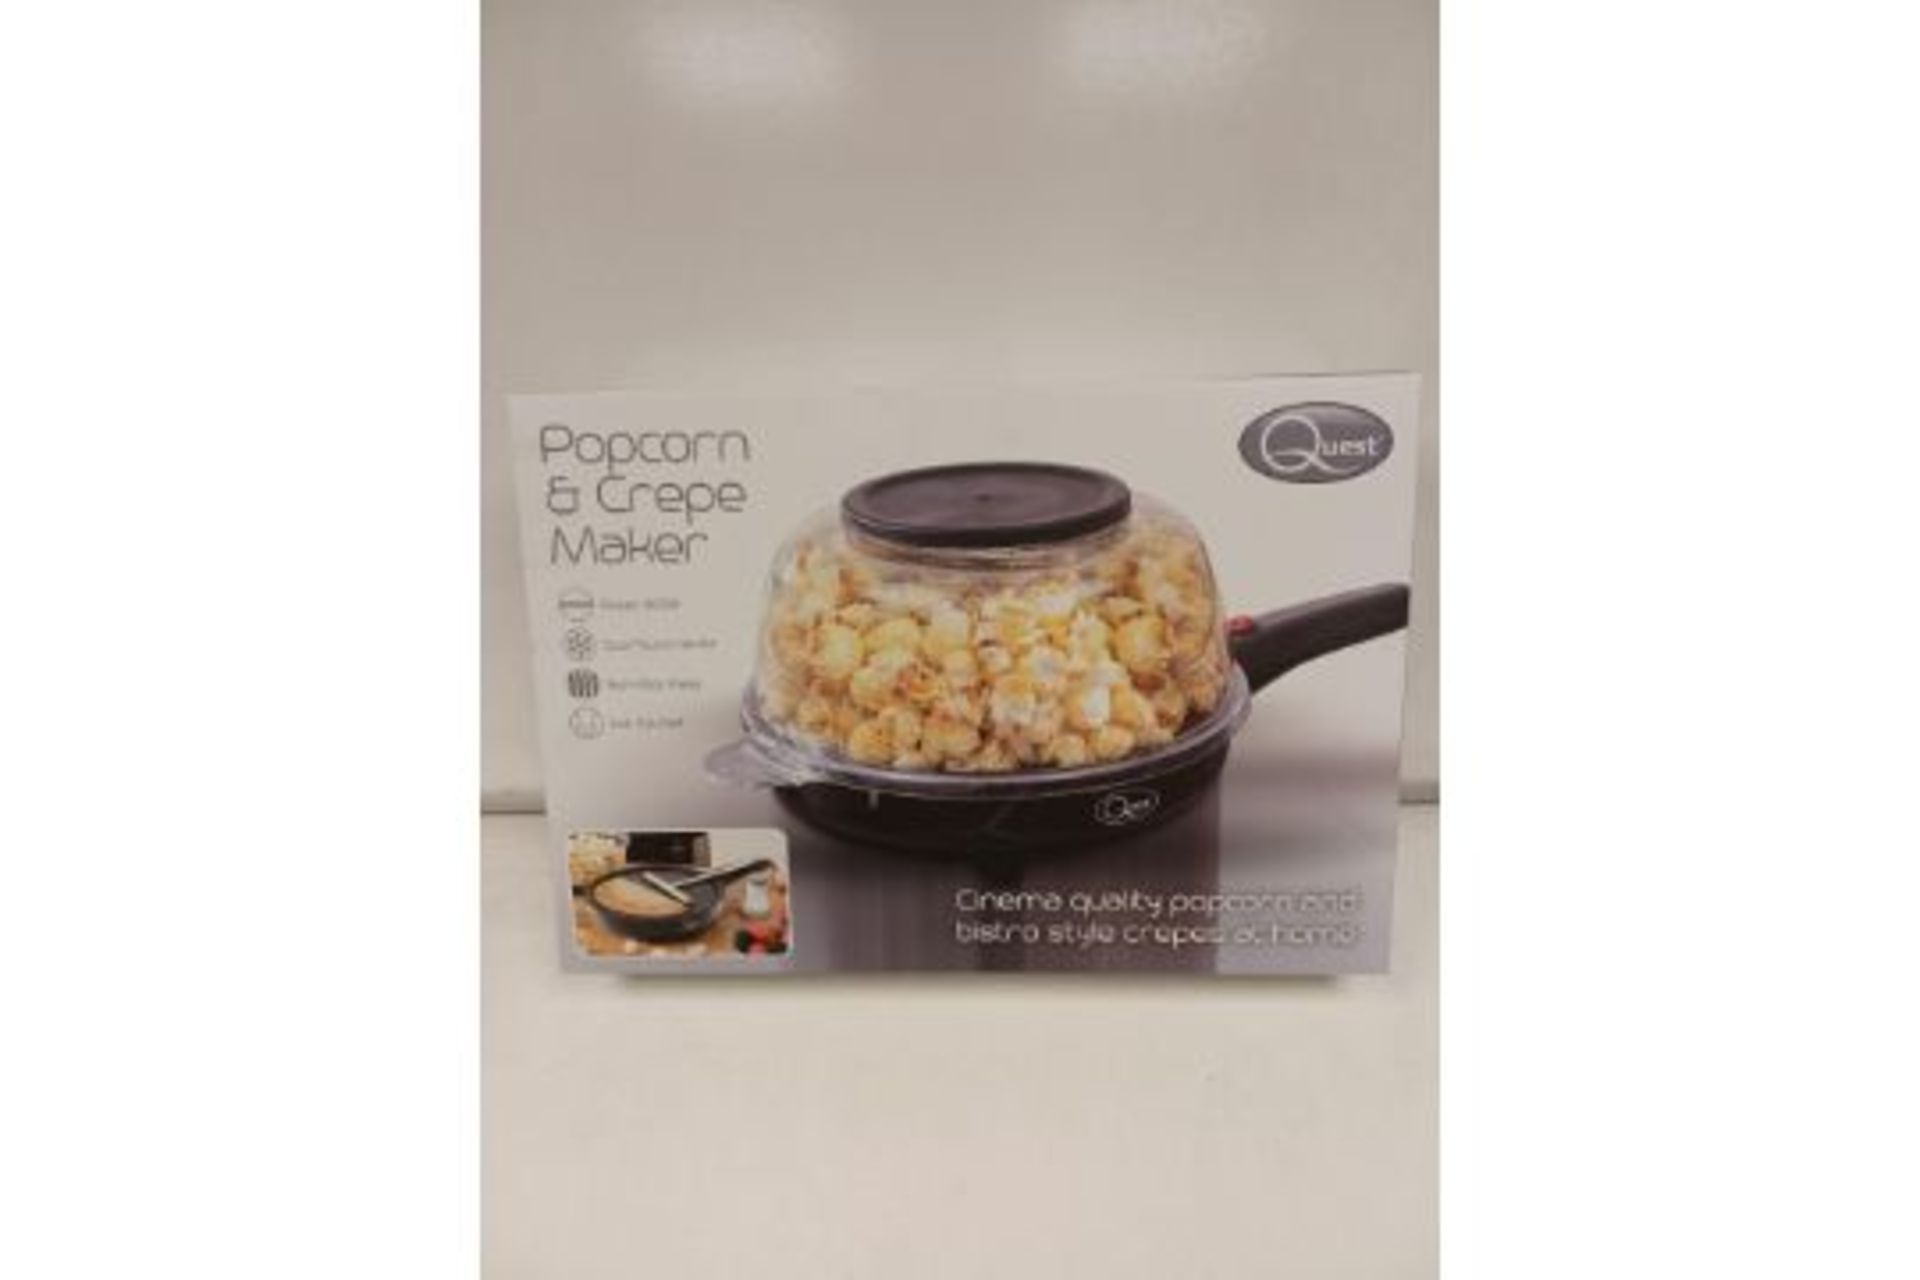 3 X NEW BOXED QUEST POPCORN & CREPE MAKERS. 800W. COOL TOUCH HANDLE. NON-STICK PLATES, ANTI SLIP